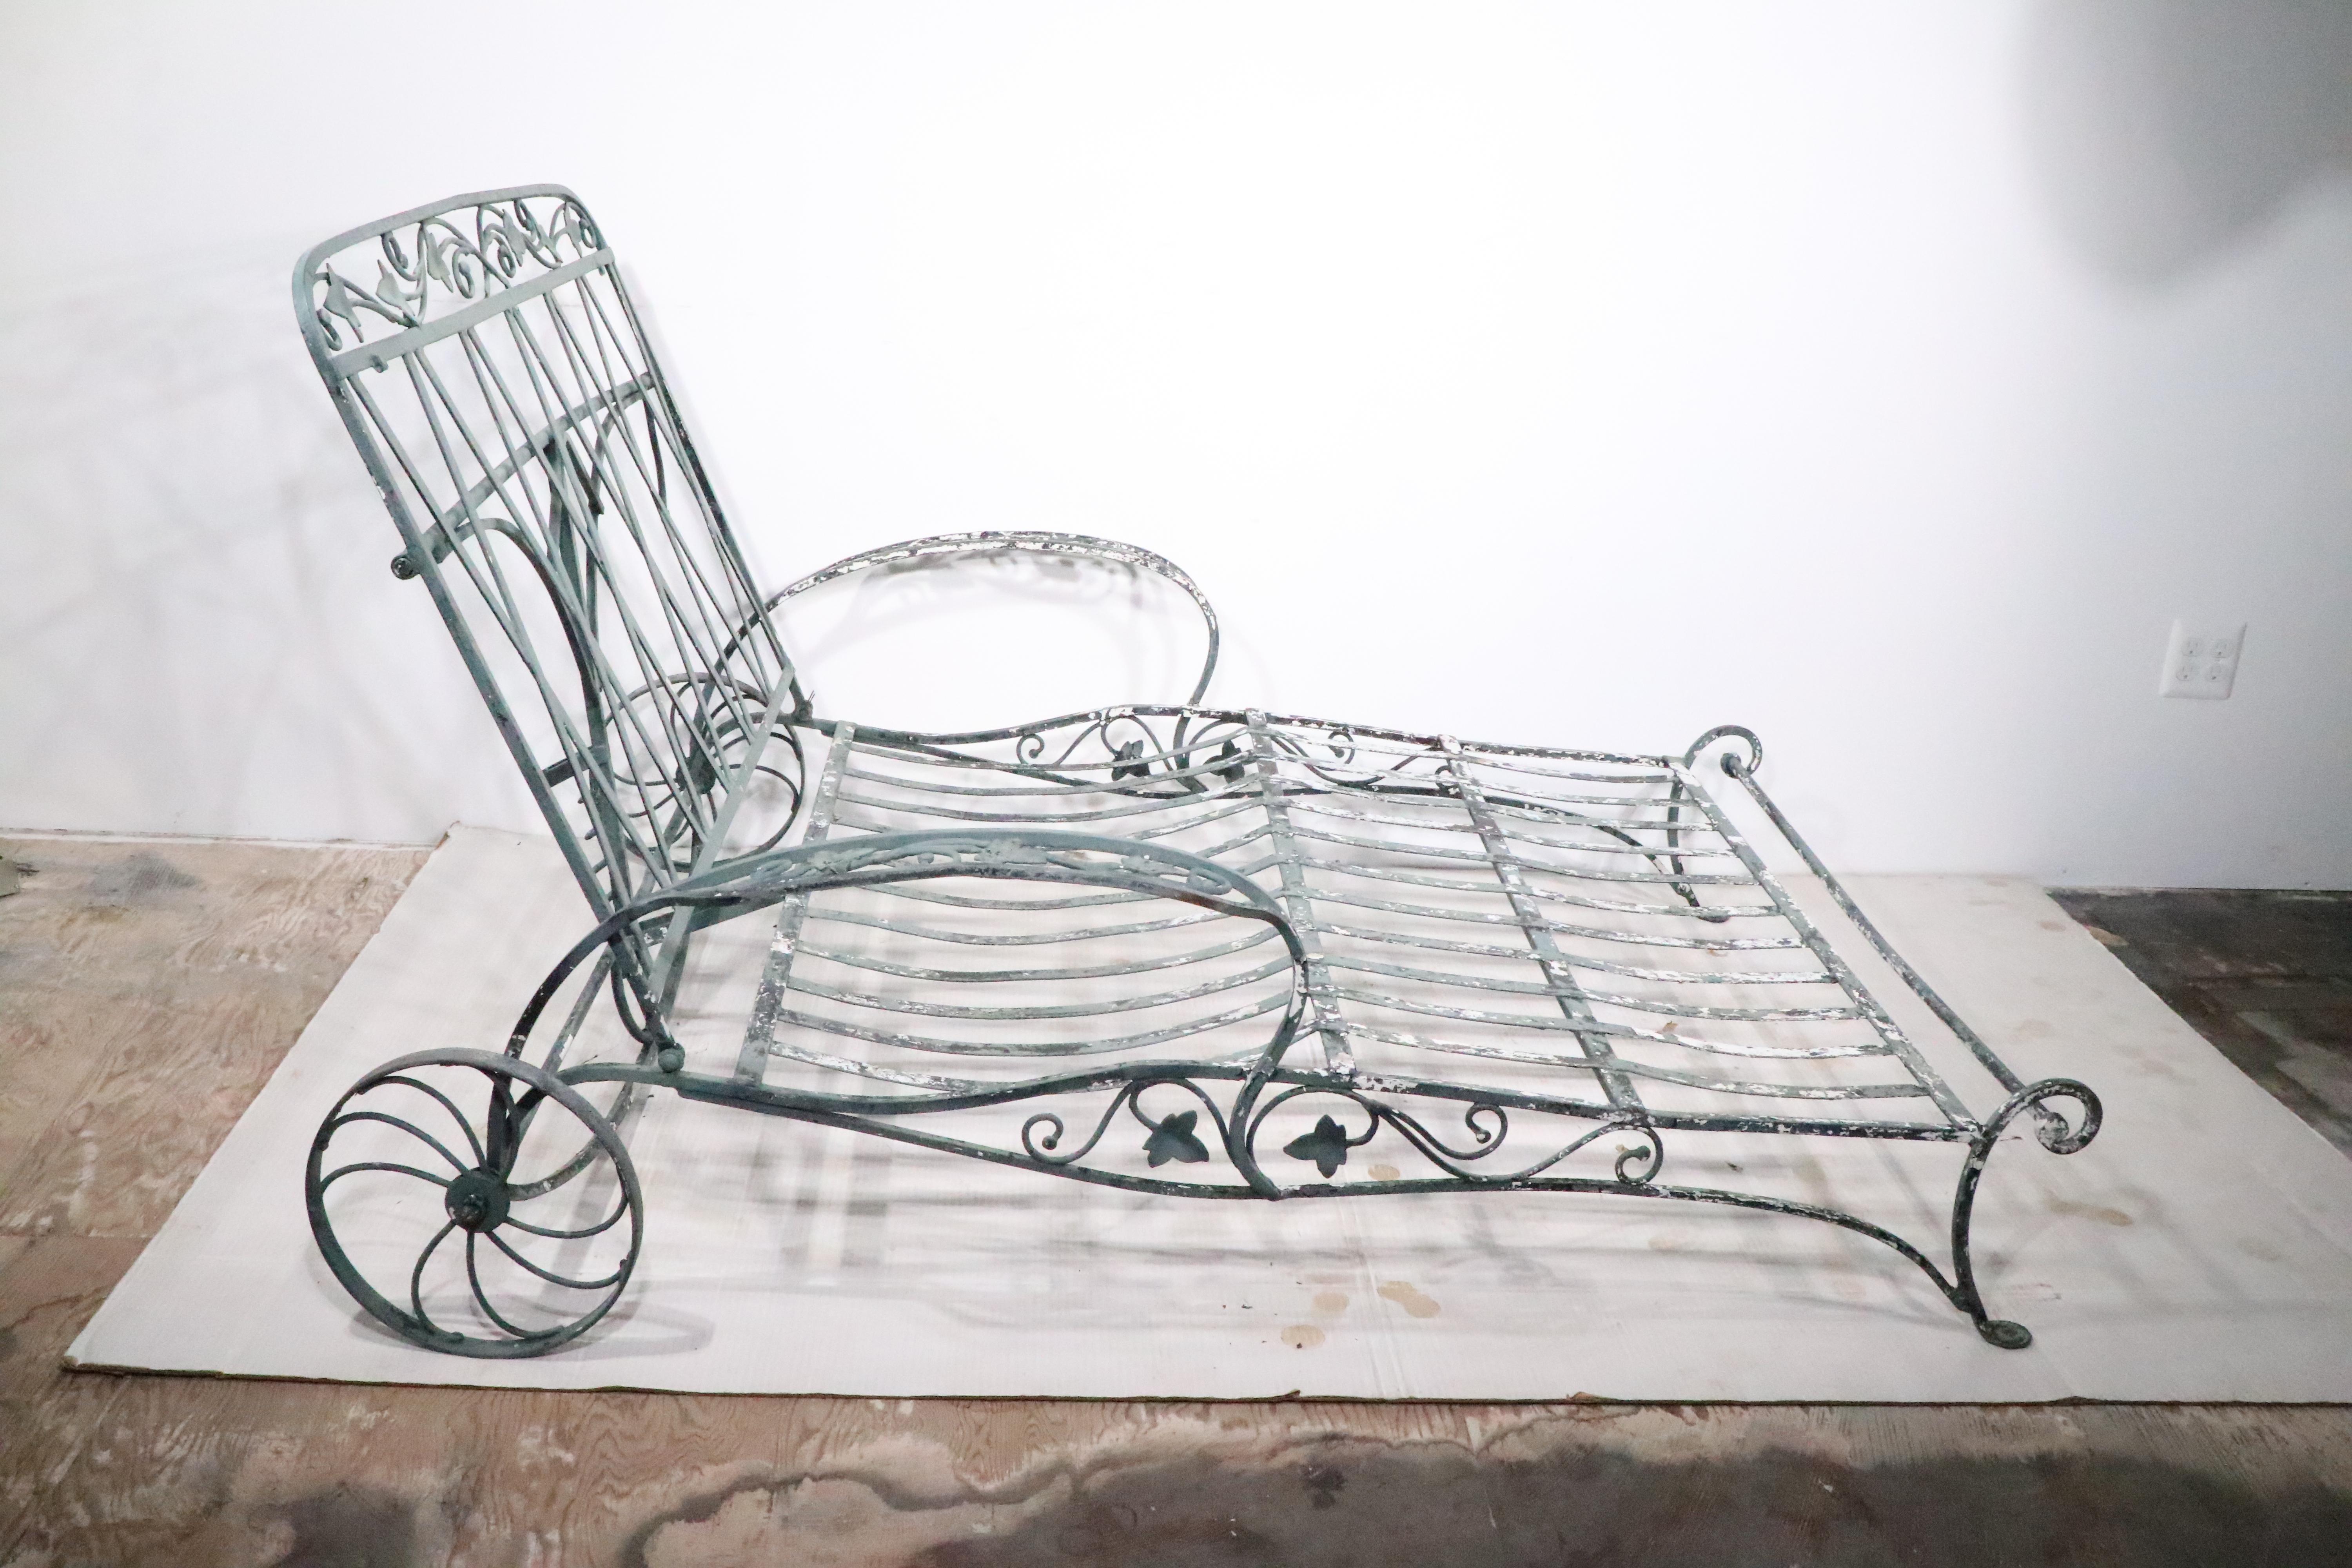 Rare wrought iron  double chaise by Salterini. The chairs features decorative foliate metalwork, an adjustable back, and rear wheels. The back support raises from a flat position, to upright  ( Lowest H 14 x H in Upright position 39 inches ).
 The